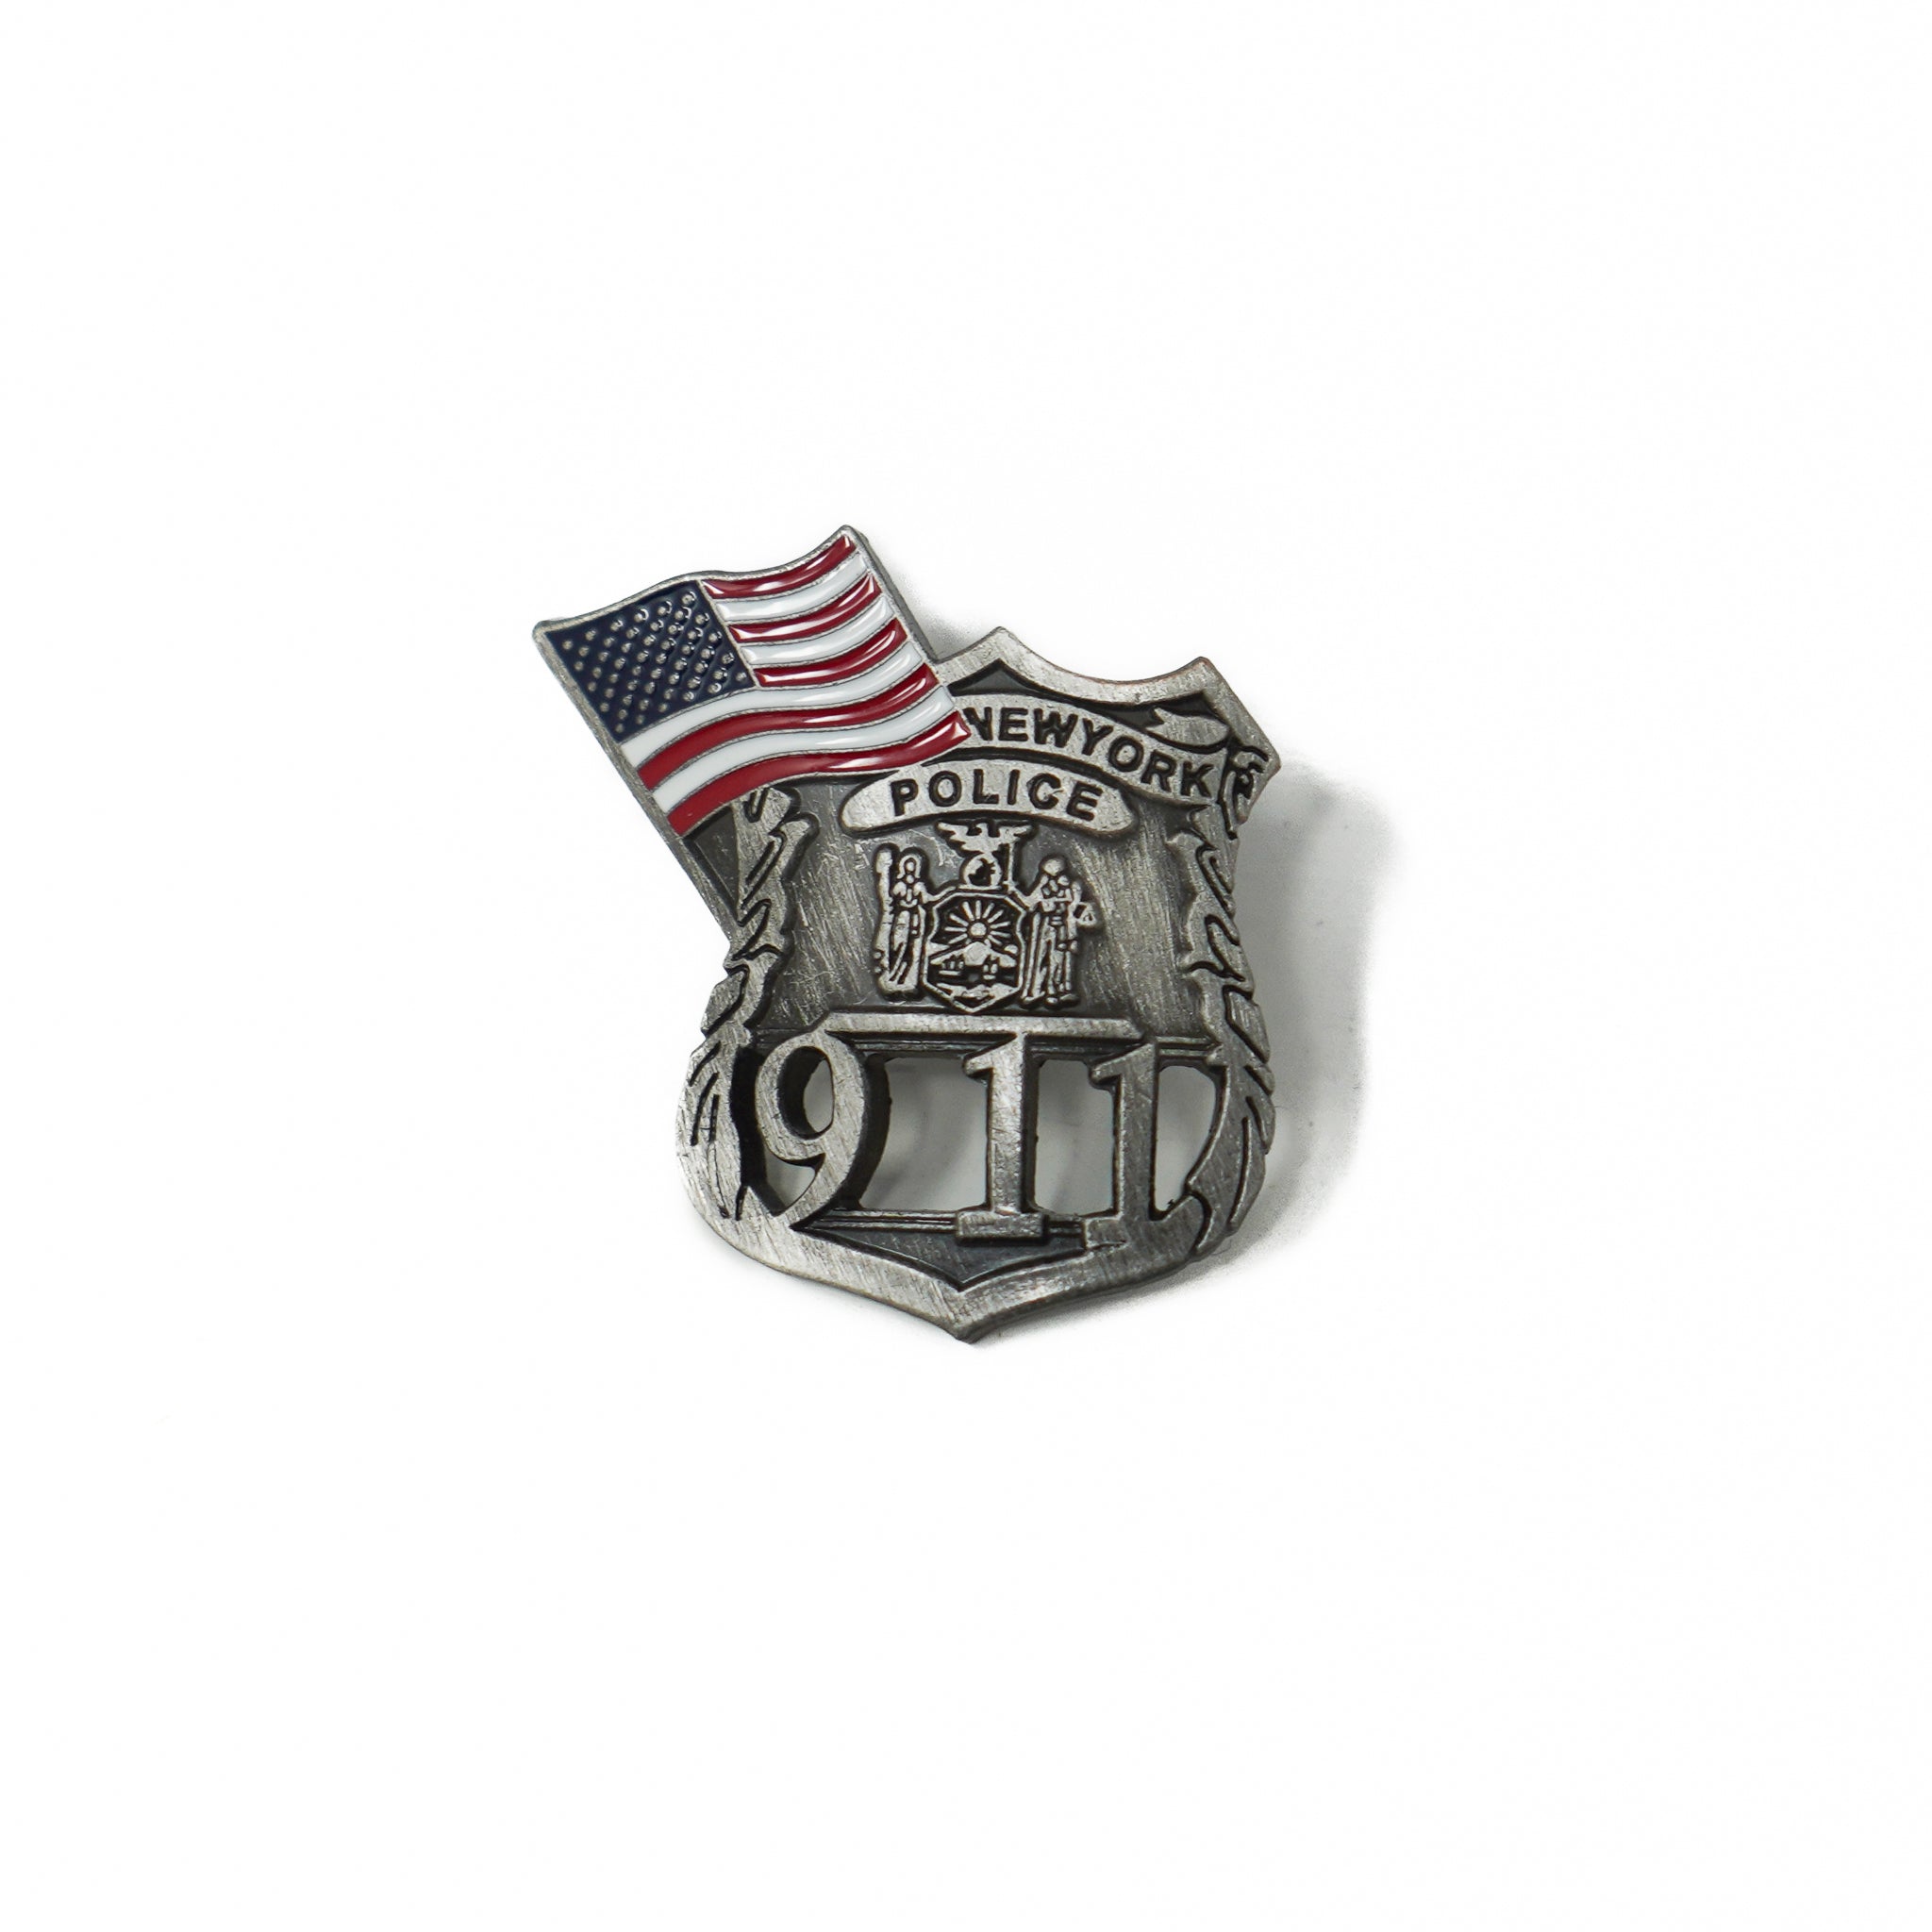 At Auction: COLLECTION OF VINTAGE PINS POLICE, 9/11, ORGANIZATIONS